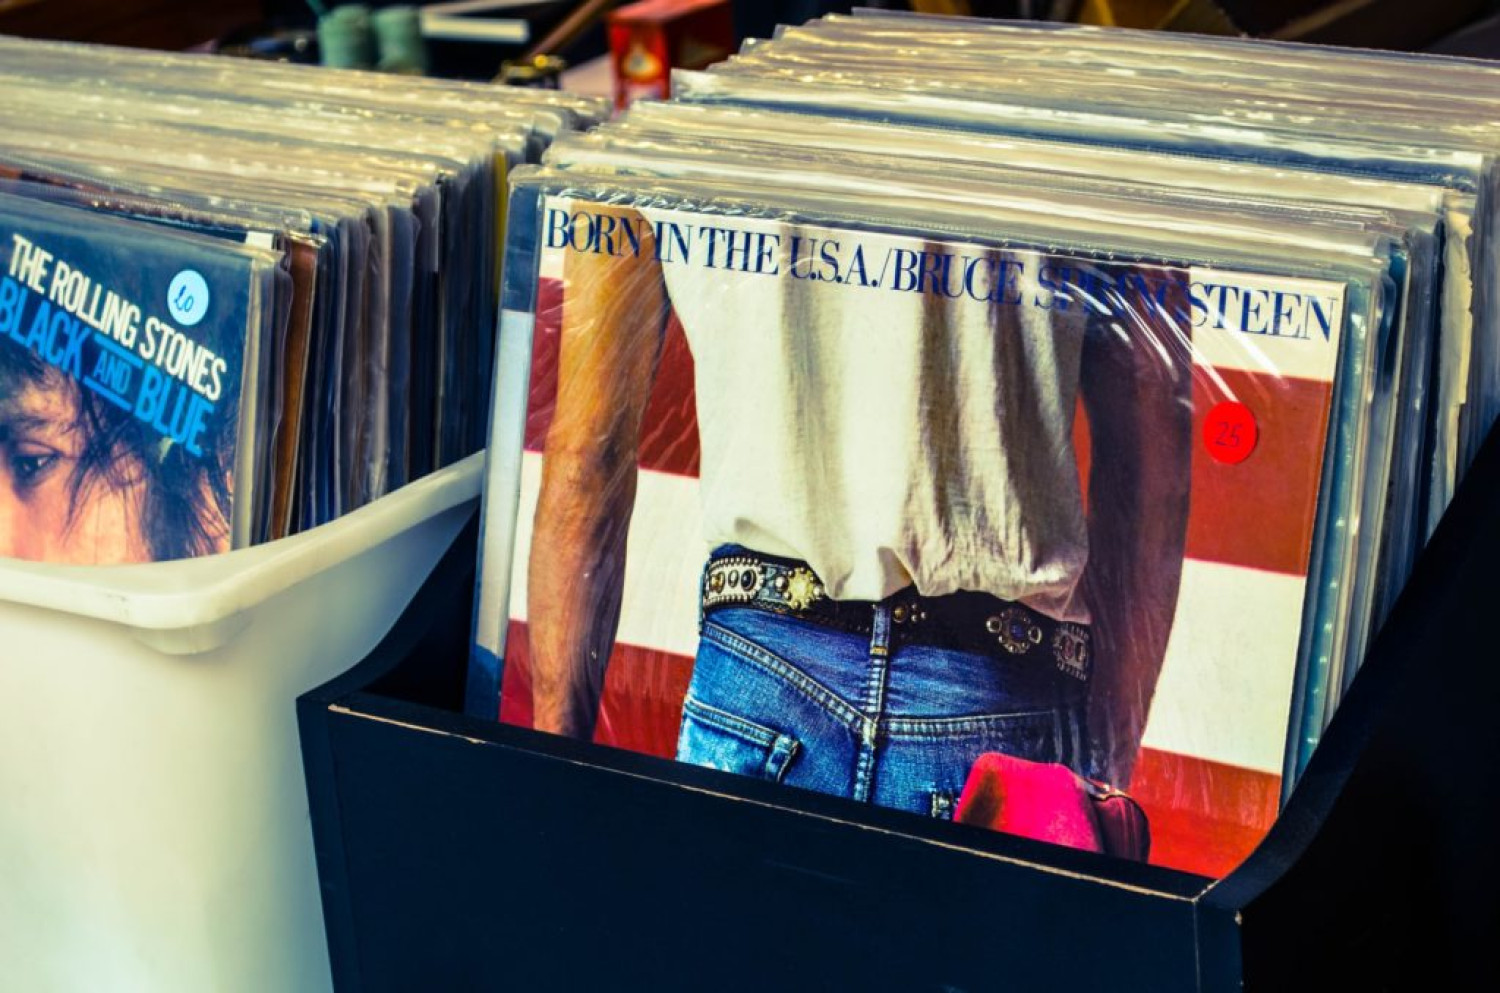 The image depicts two boxes of records. The front record is Born in the USA by Bruce Springsteen. The record cover shows a man with a white T-shirt, a belt and blue jeans with his back to the audience. You can only see his torso, lower back and arms. The background is the red and white stripes of the American flag.